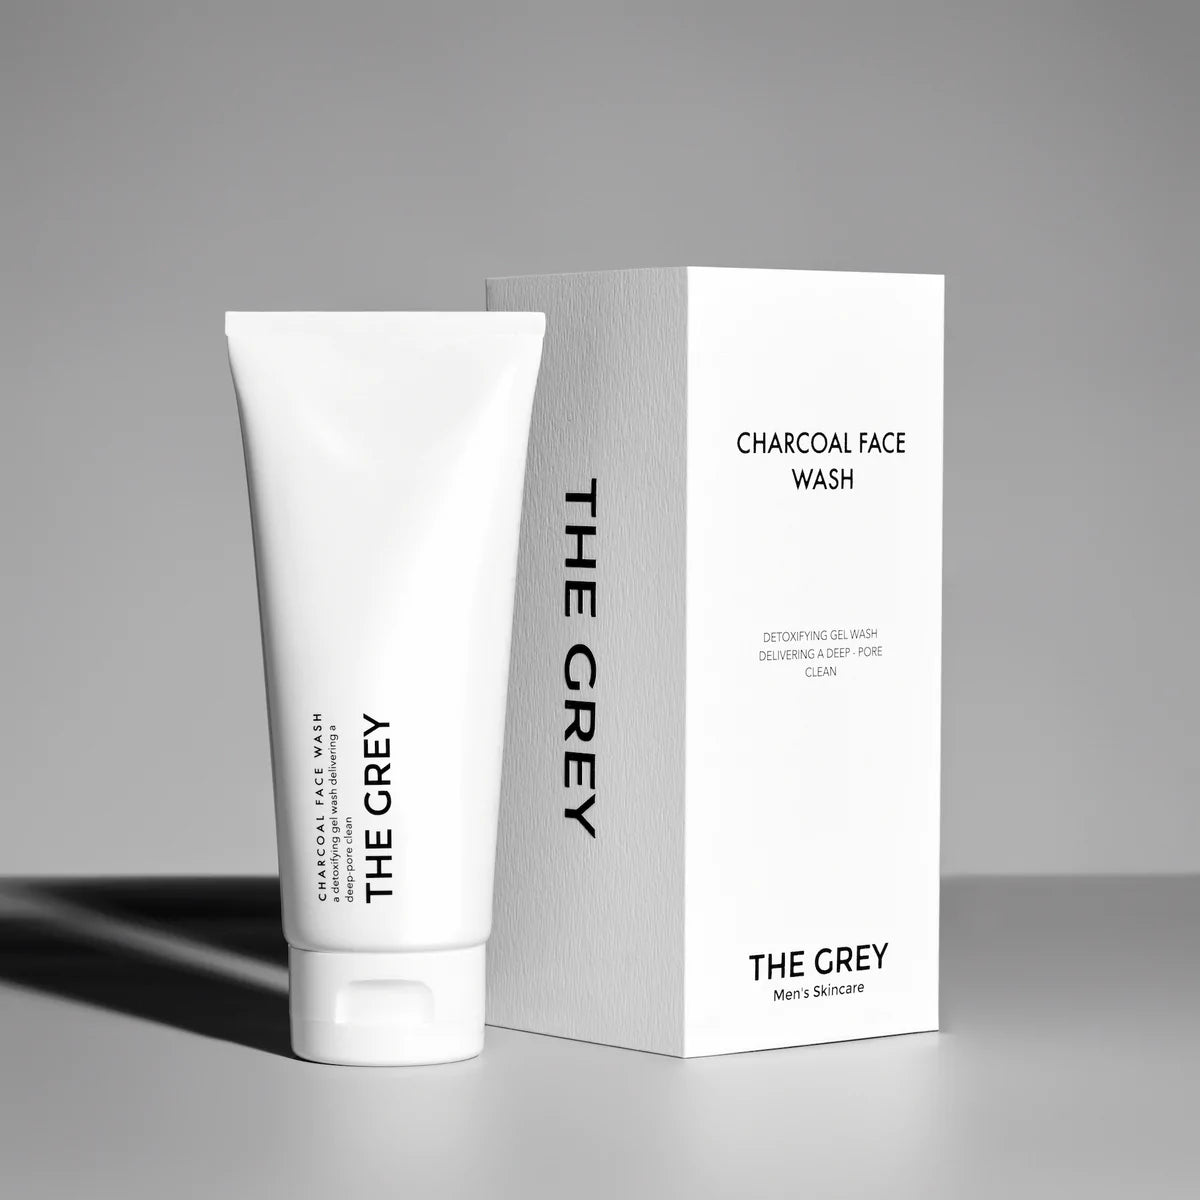 The grey charcoal face wash